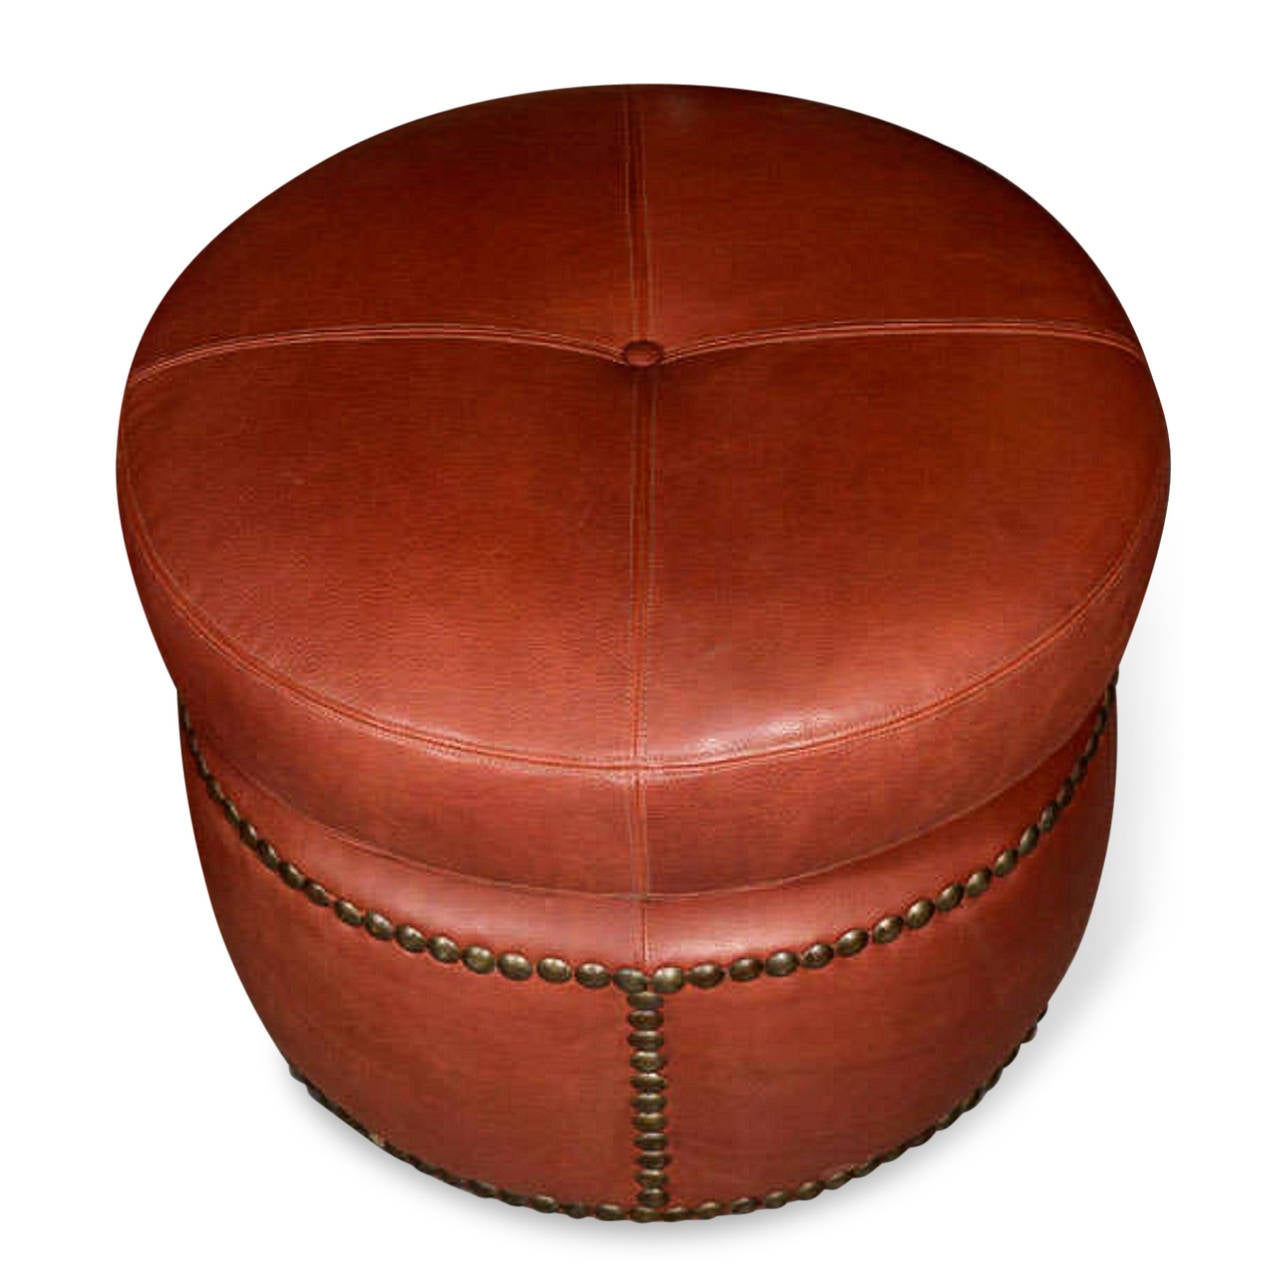 Pair of rust-colored leather poufs with studded decoration (original studs), covered in fine Morocco leather, French, 1920s. Diameter 23 in, height 17 1/2 in. 

Price for the pair.